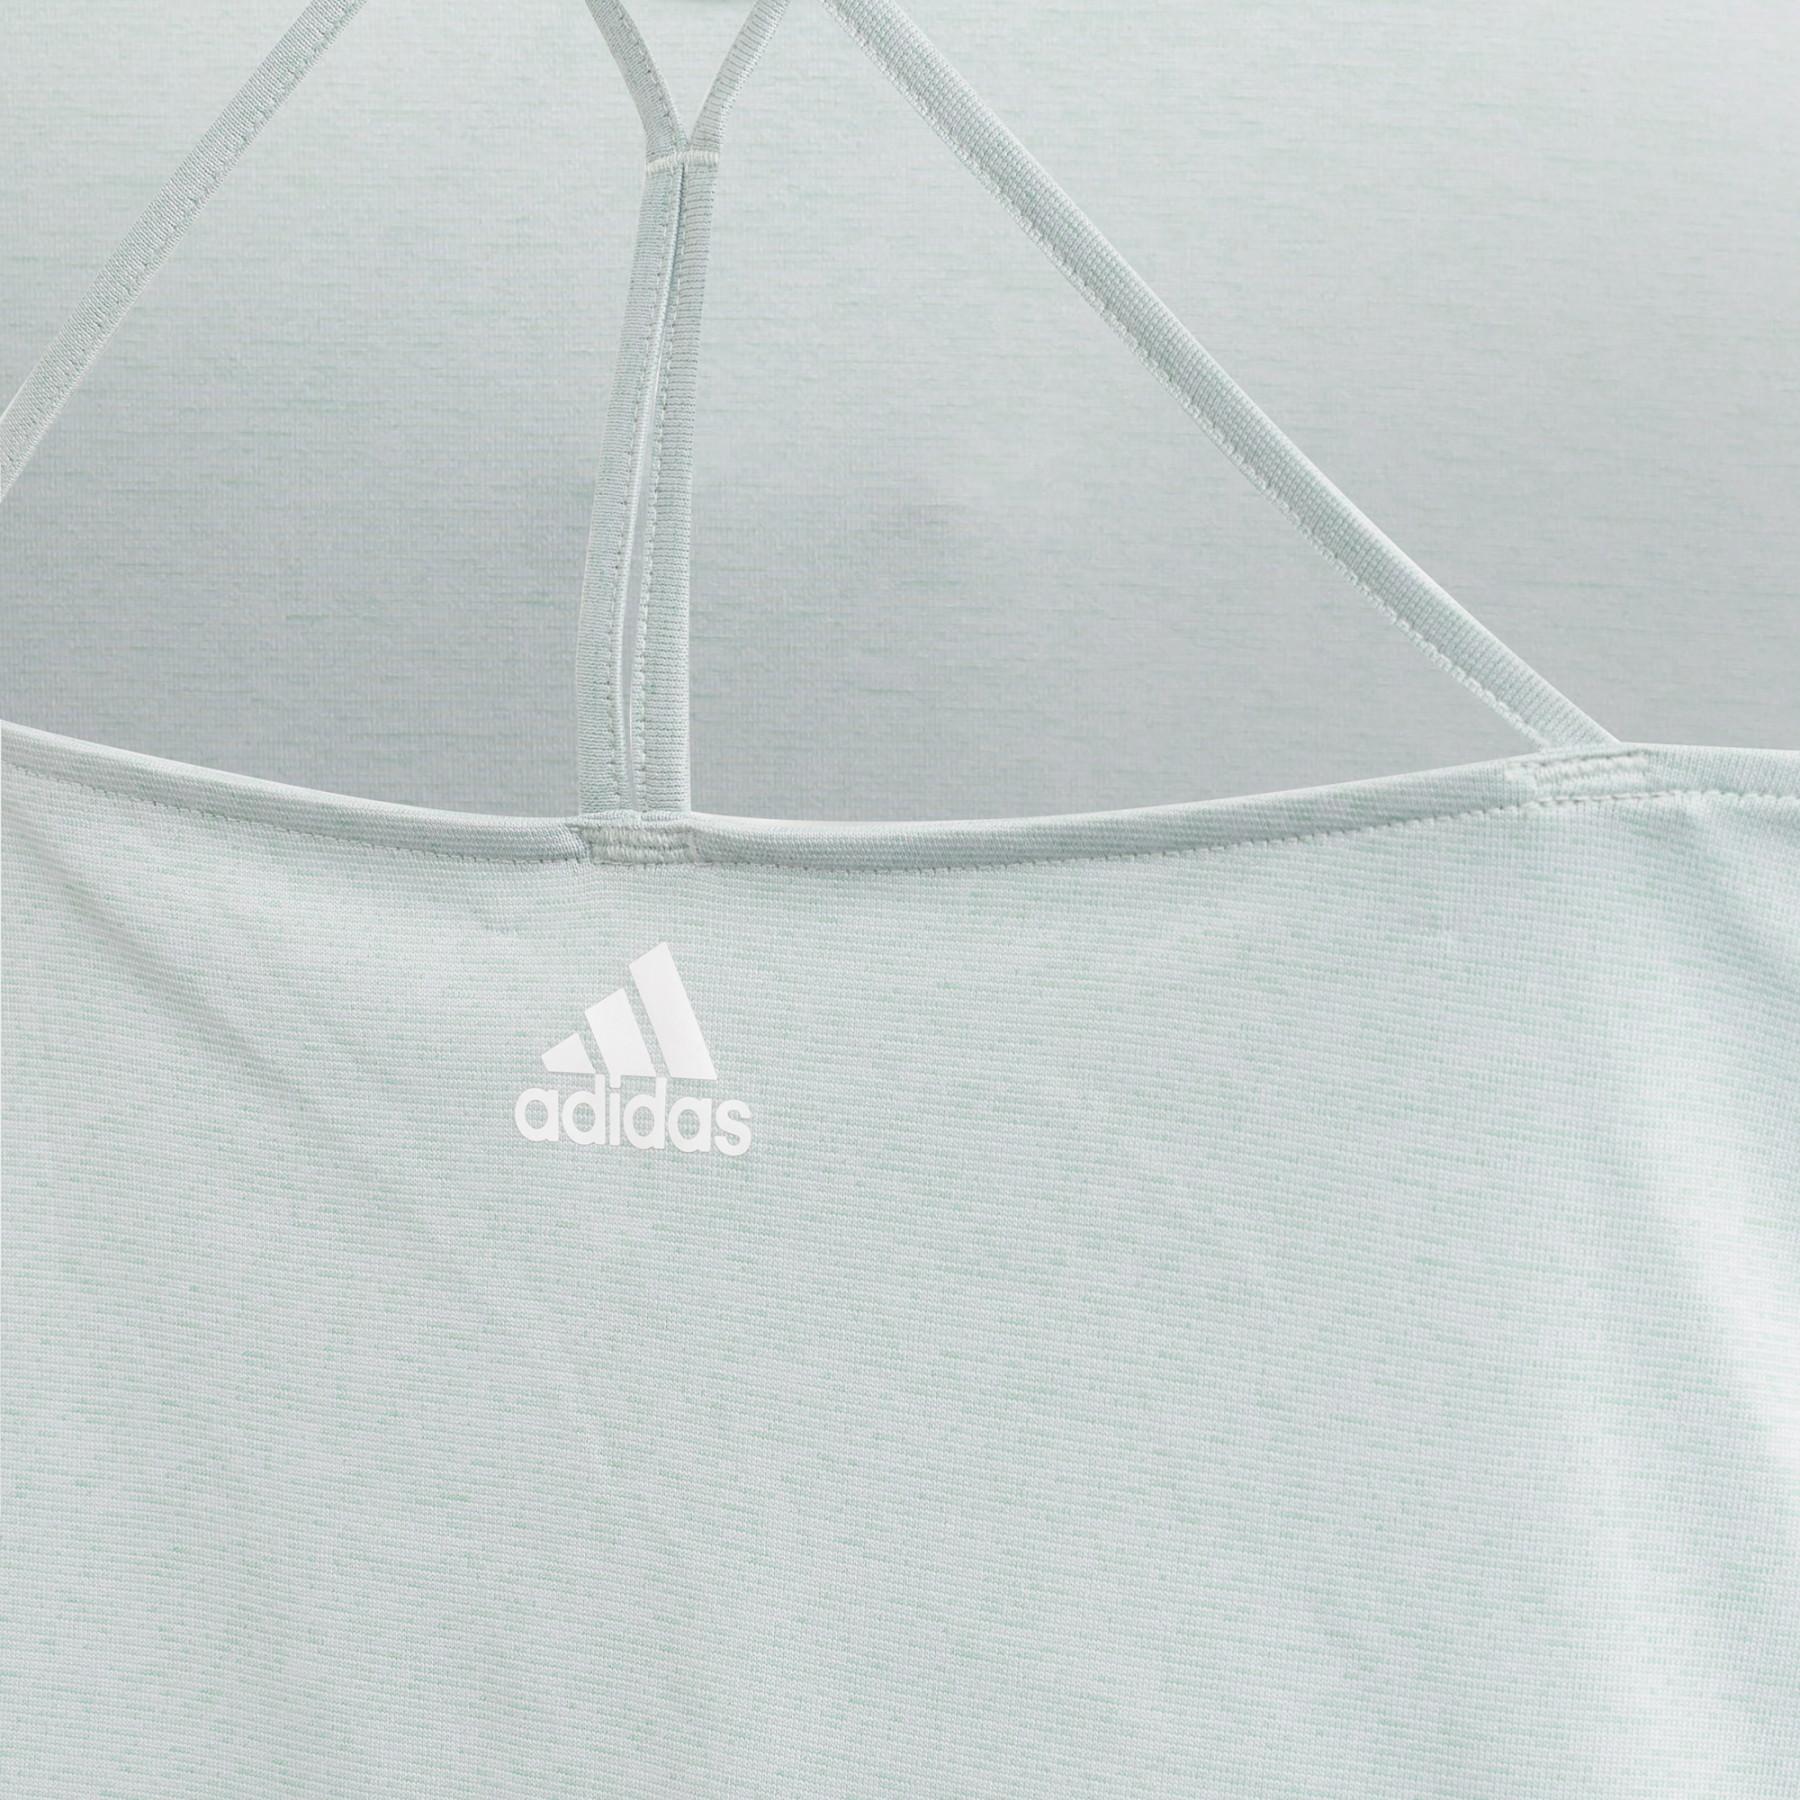 Women's tank top adidas Tunic – grandes tailles